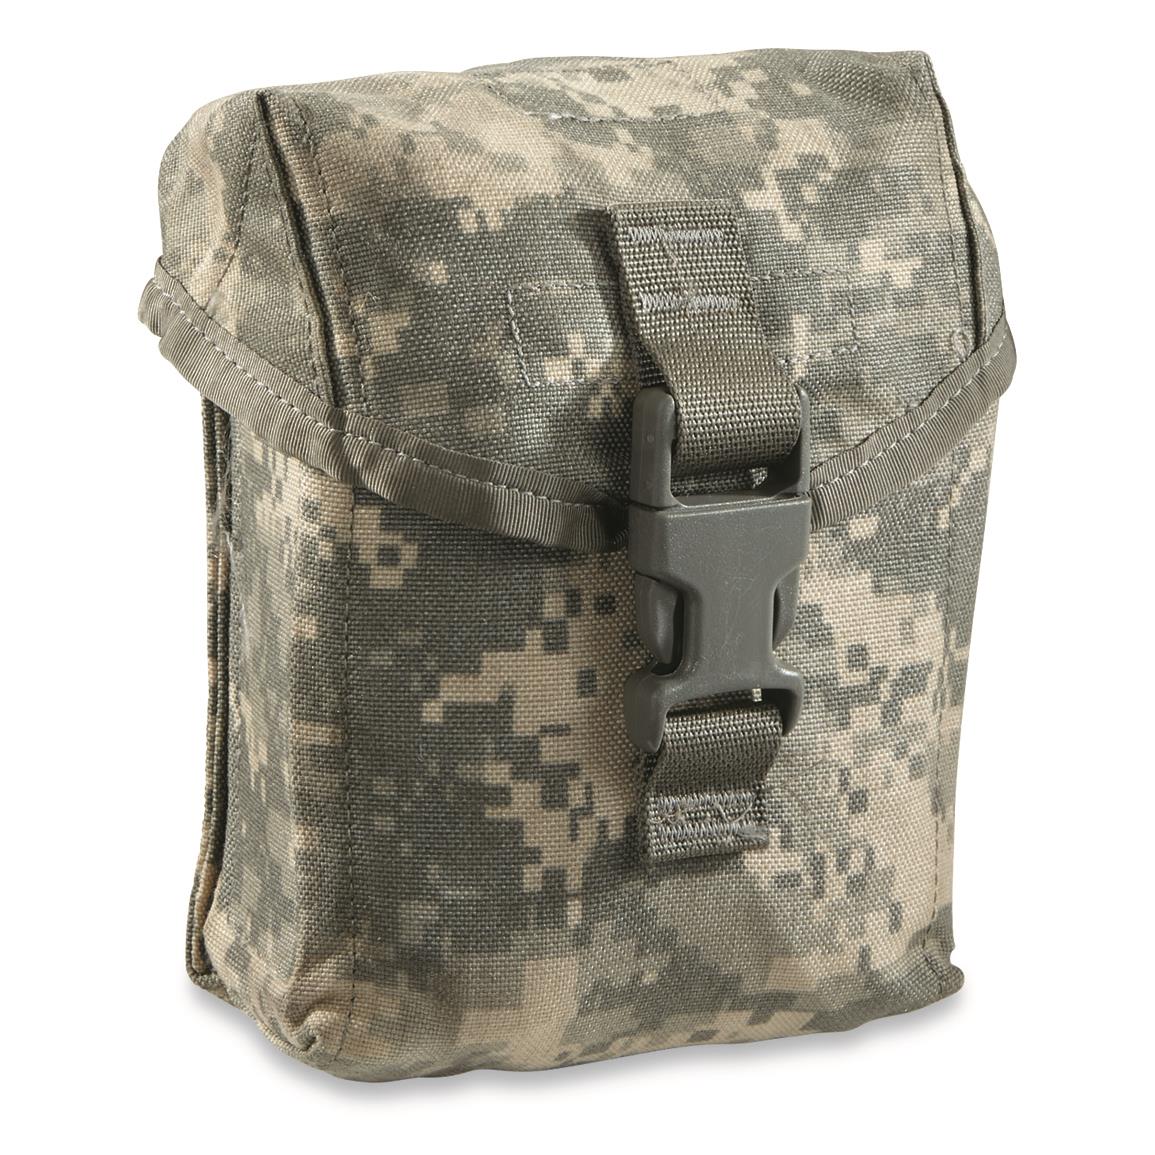 U.S. Military Surplus IFAK Pouch with Insert, New